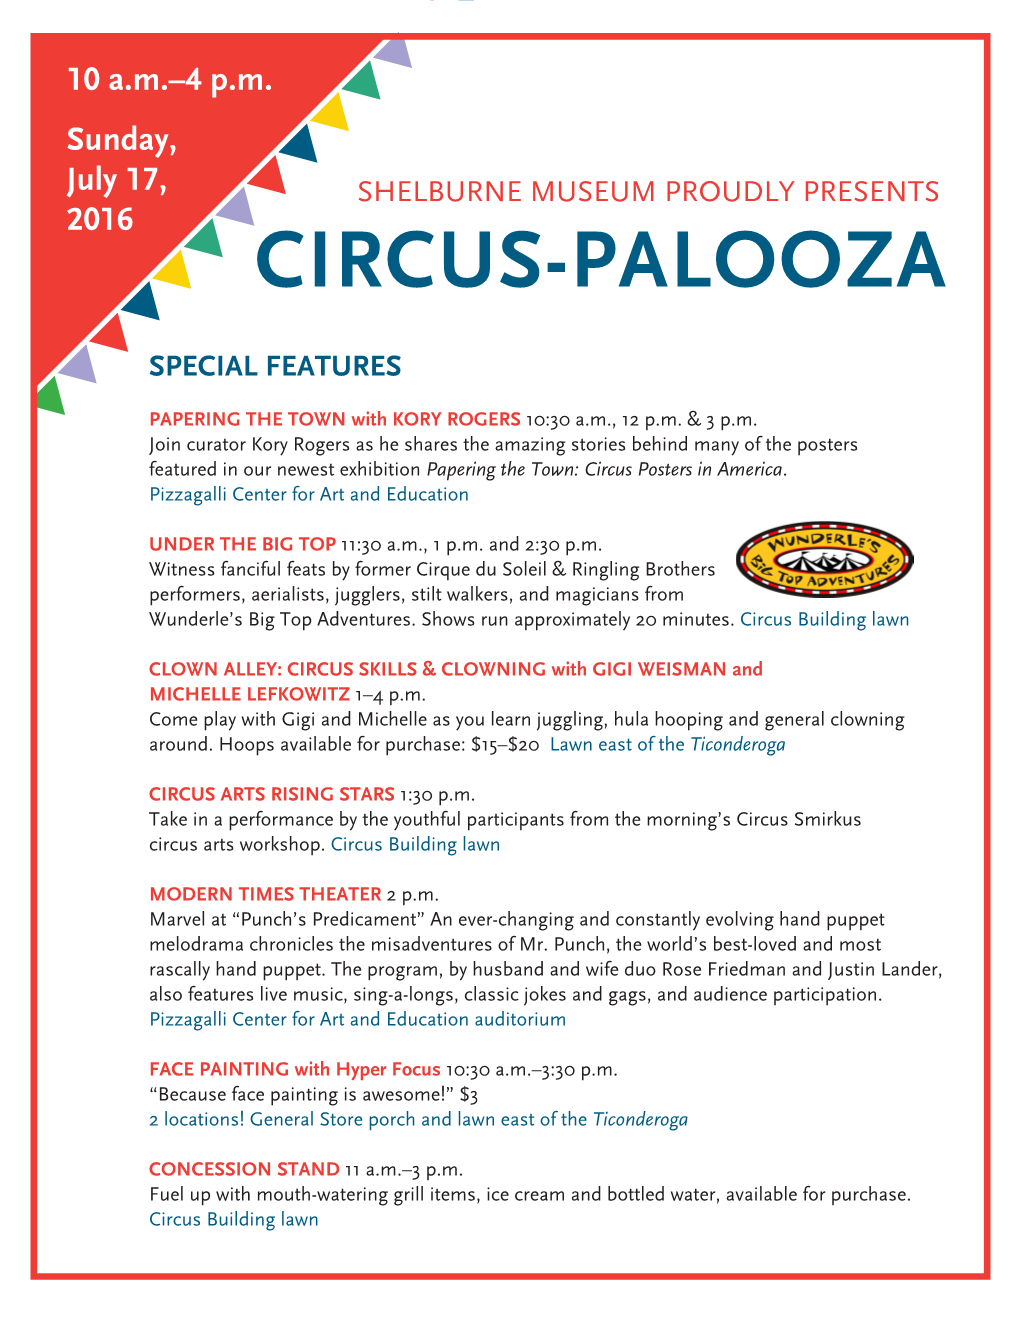 Circus-Palooza Schedule of Events